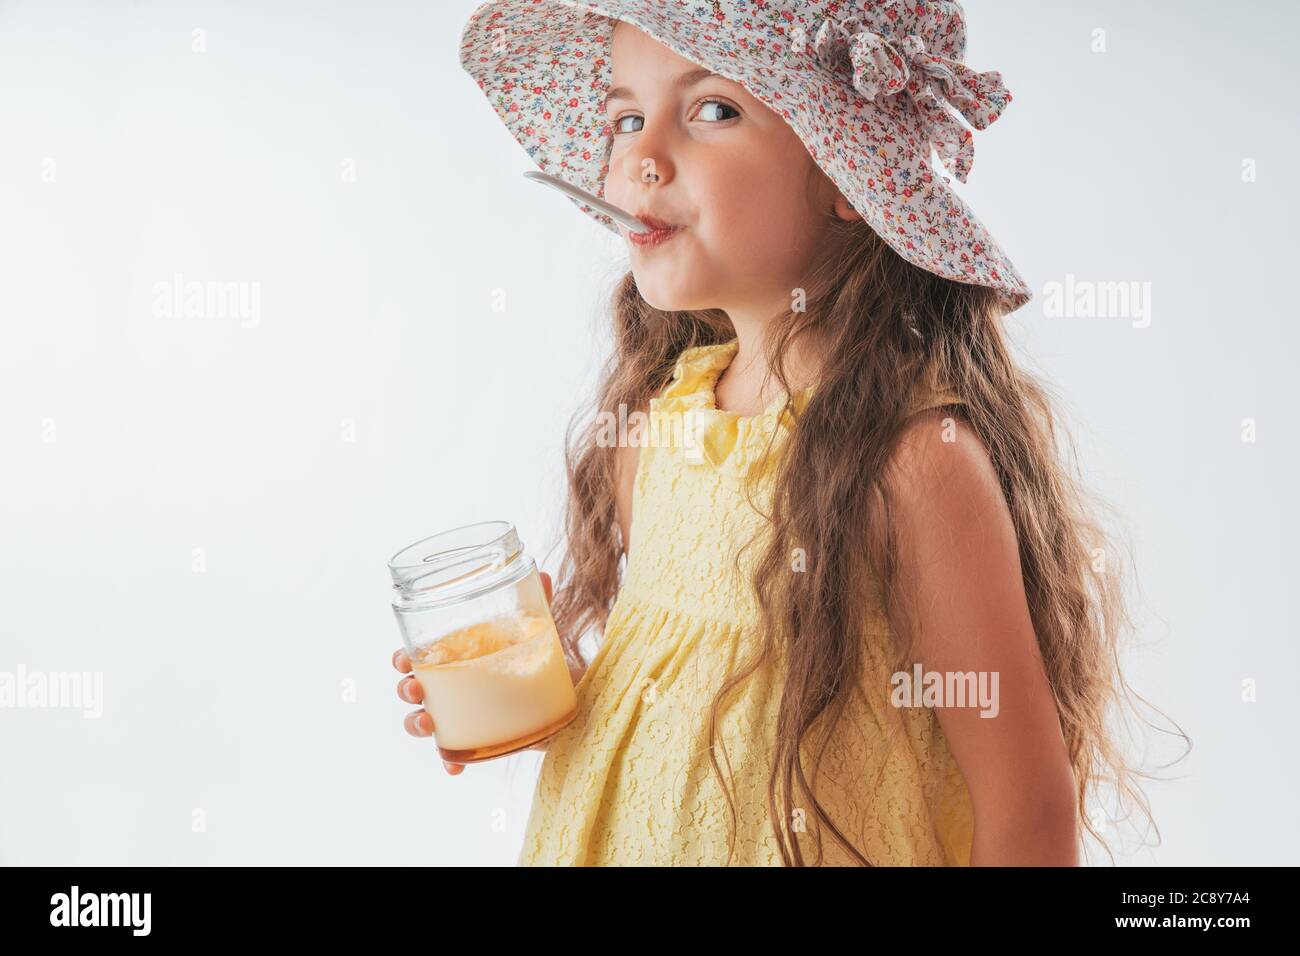 Beautiful little girl with spoon in mouth eating tasty cream. Eating yummy ice cream is fun Stock Photo